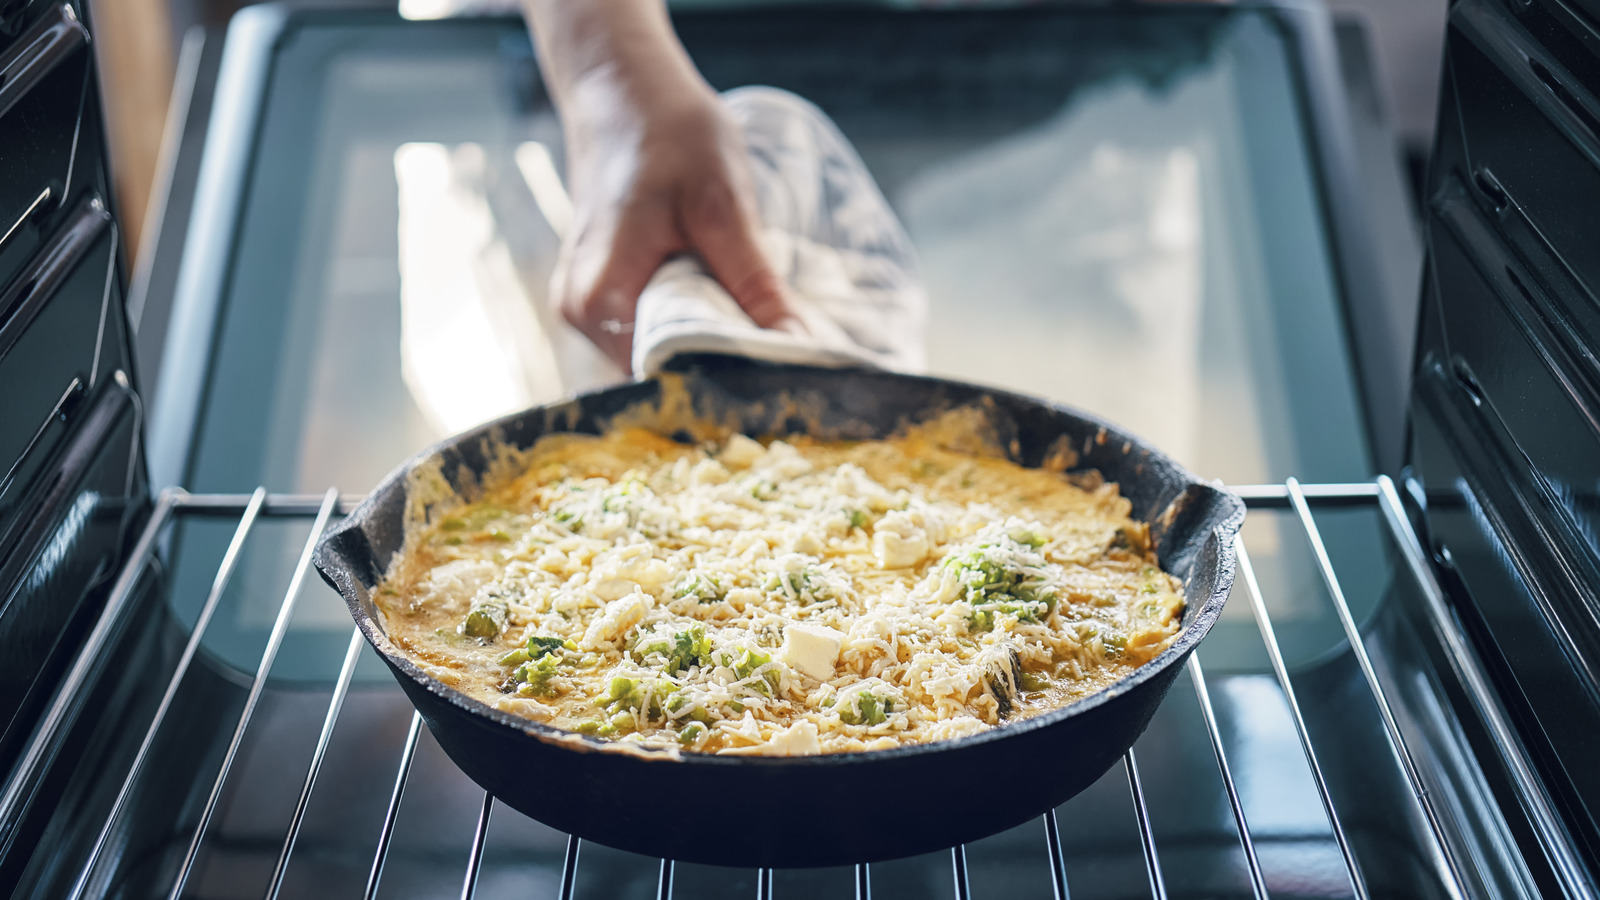 Avoid Cast-Iron Pans When Making Casserole With Highly Acidic Ingredients